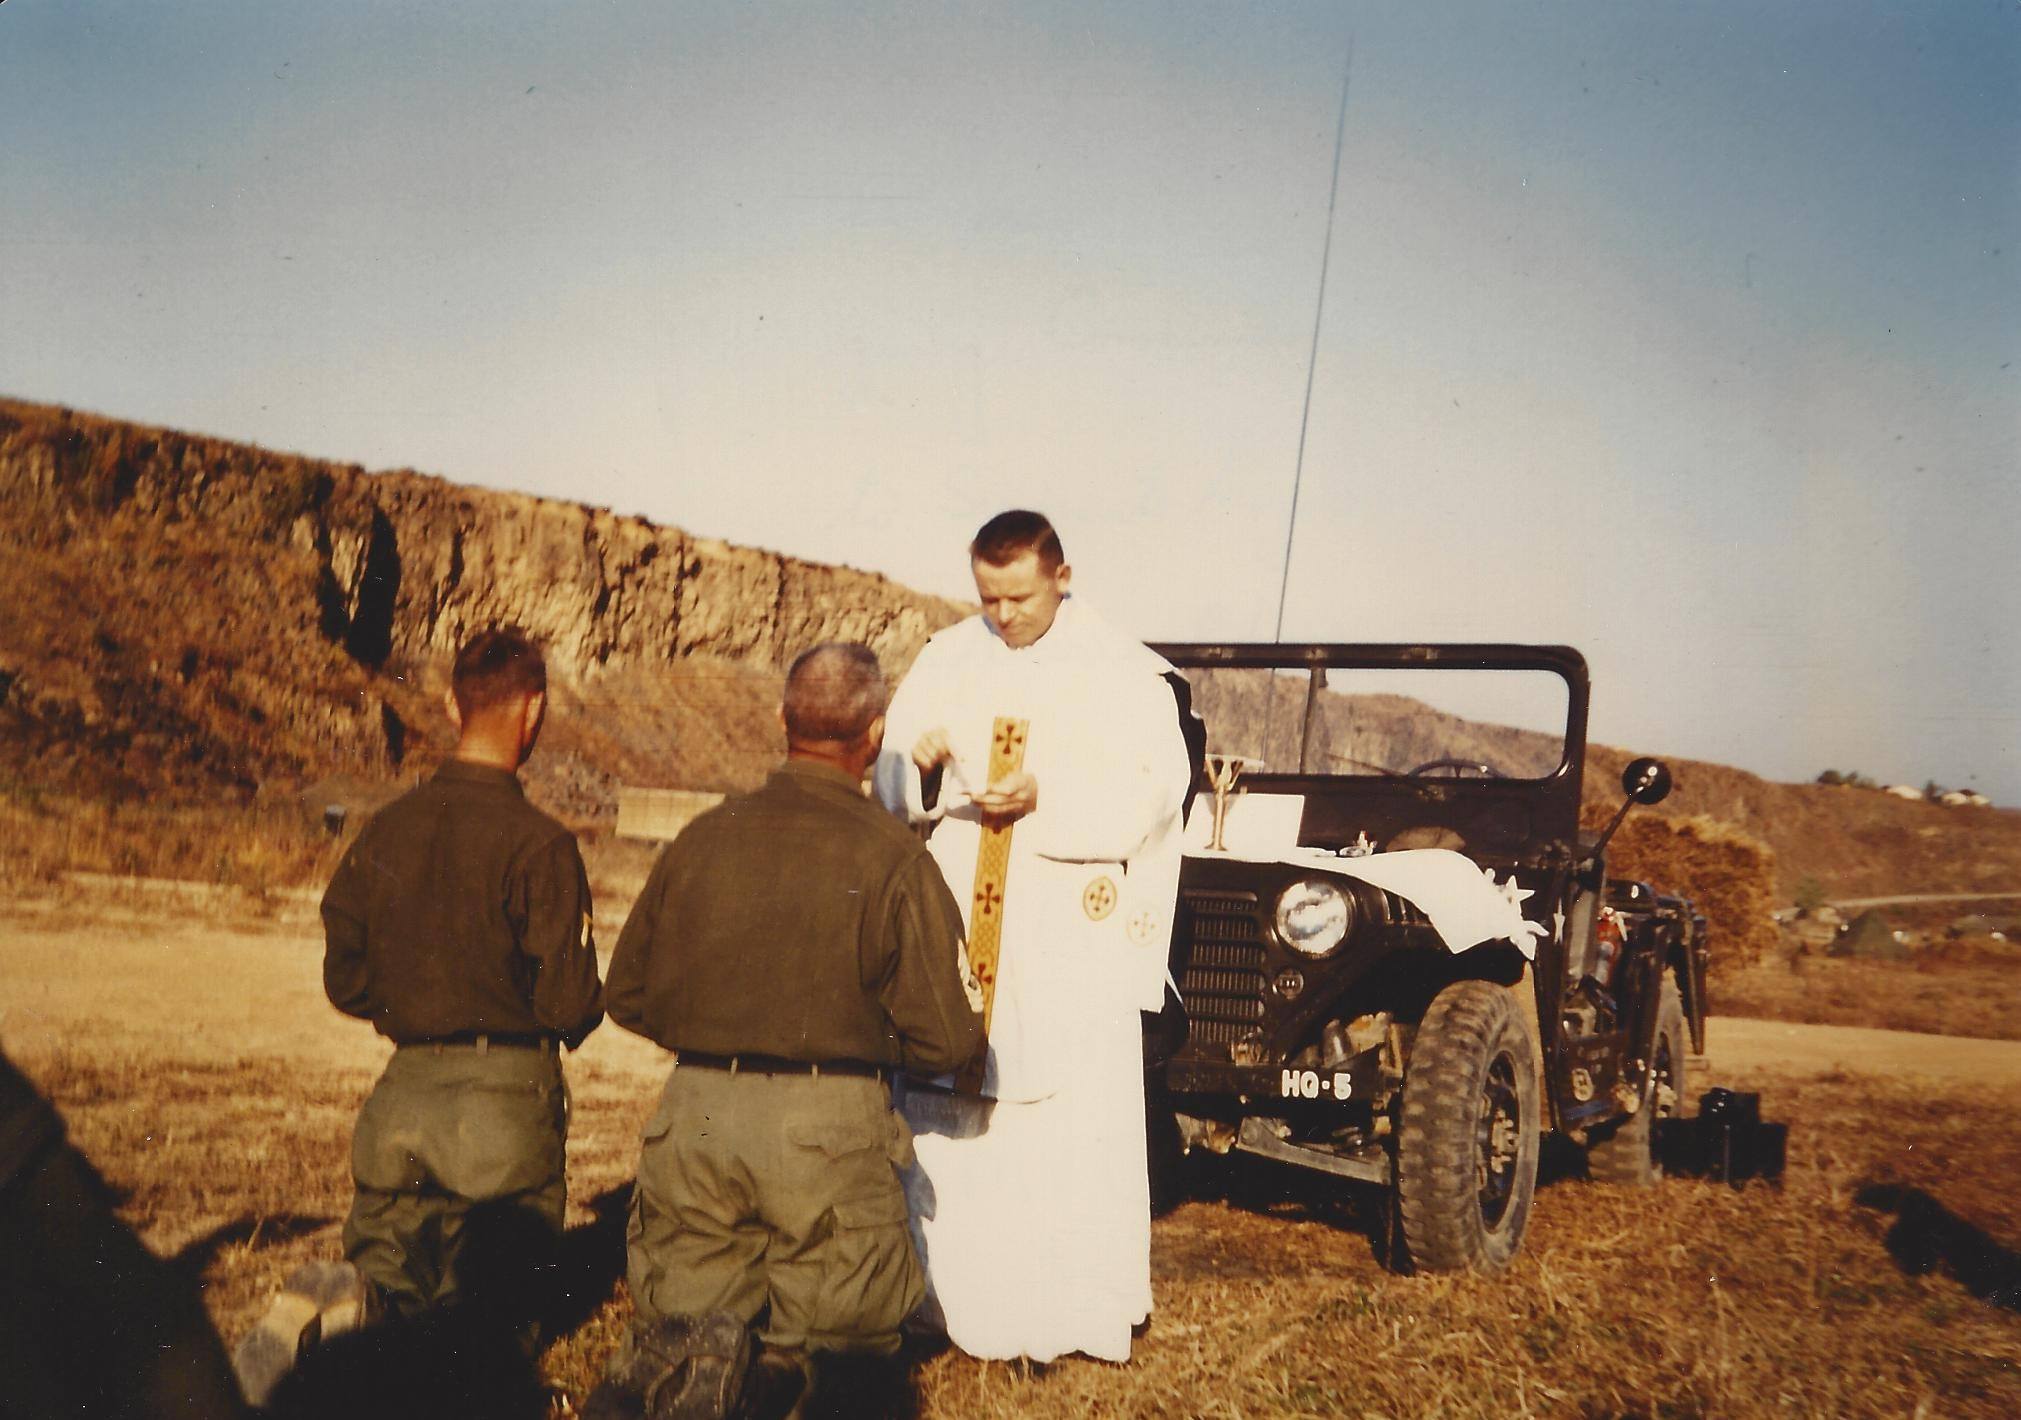 Paulist Fr. Kevin Devine speaking at the end of a Mass in Korea during his service as a U.S. Army chaplain.